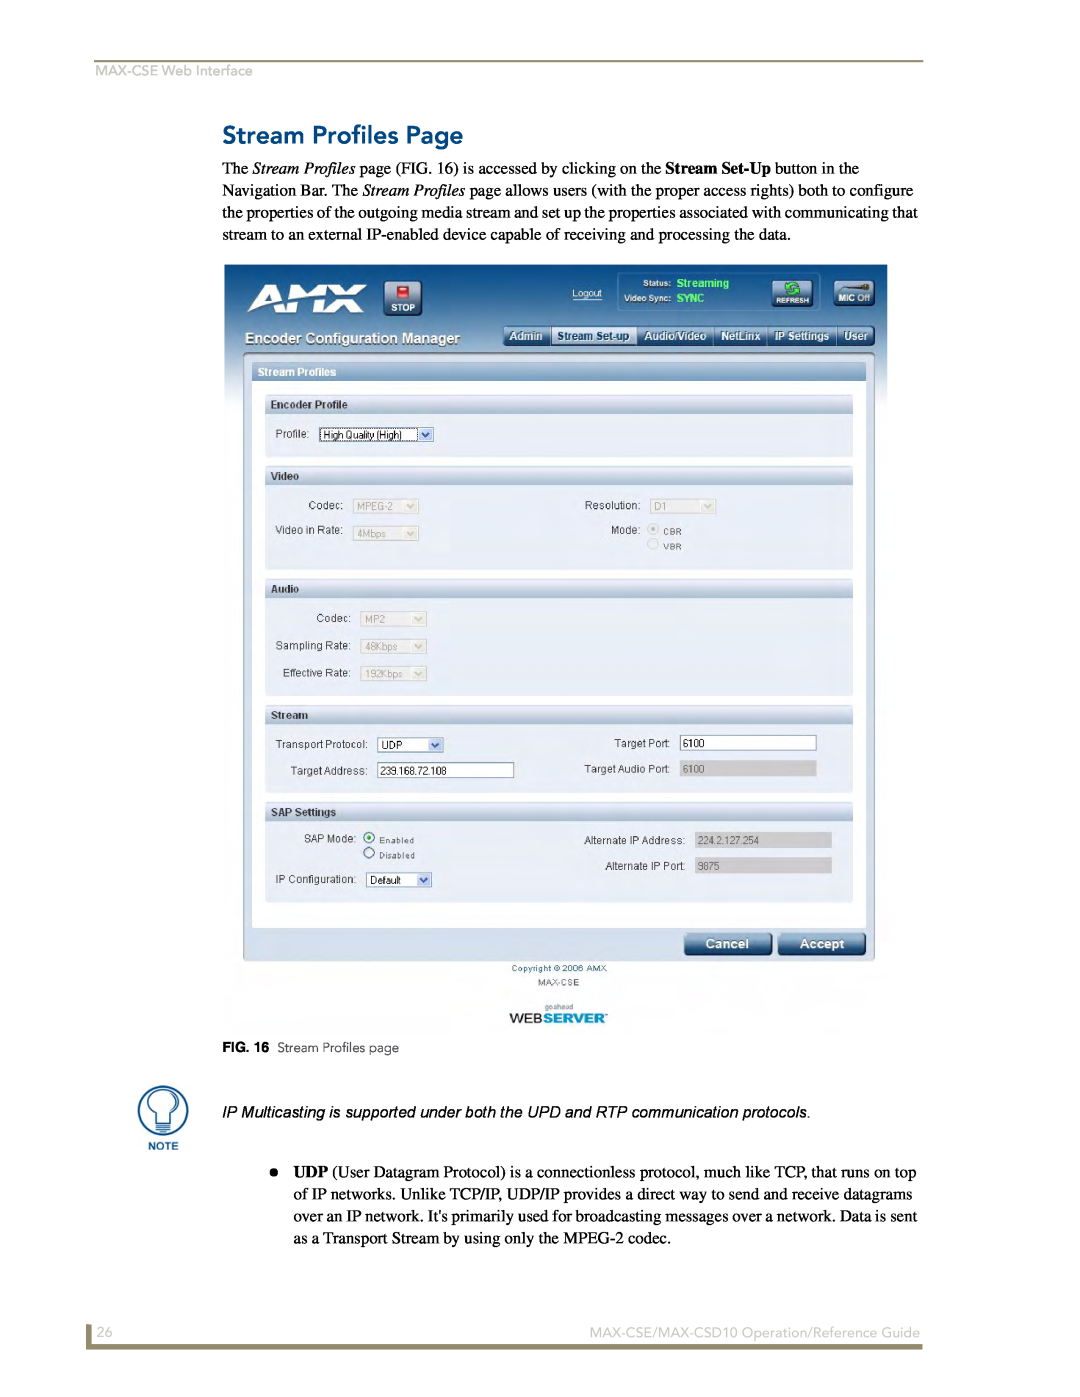 AMX MAX-CSD 10 manual Stream Profiles Page, MAX-CSEWeb Interface, MAX-CSE/MAX-CSD10Operation/Reference Guide 